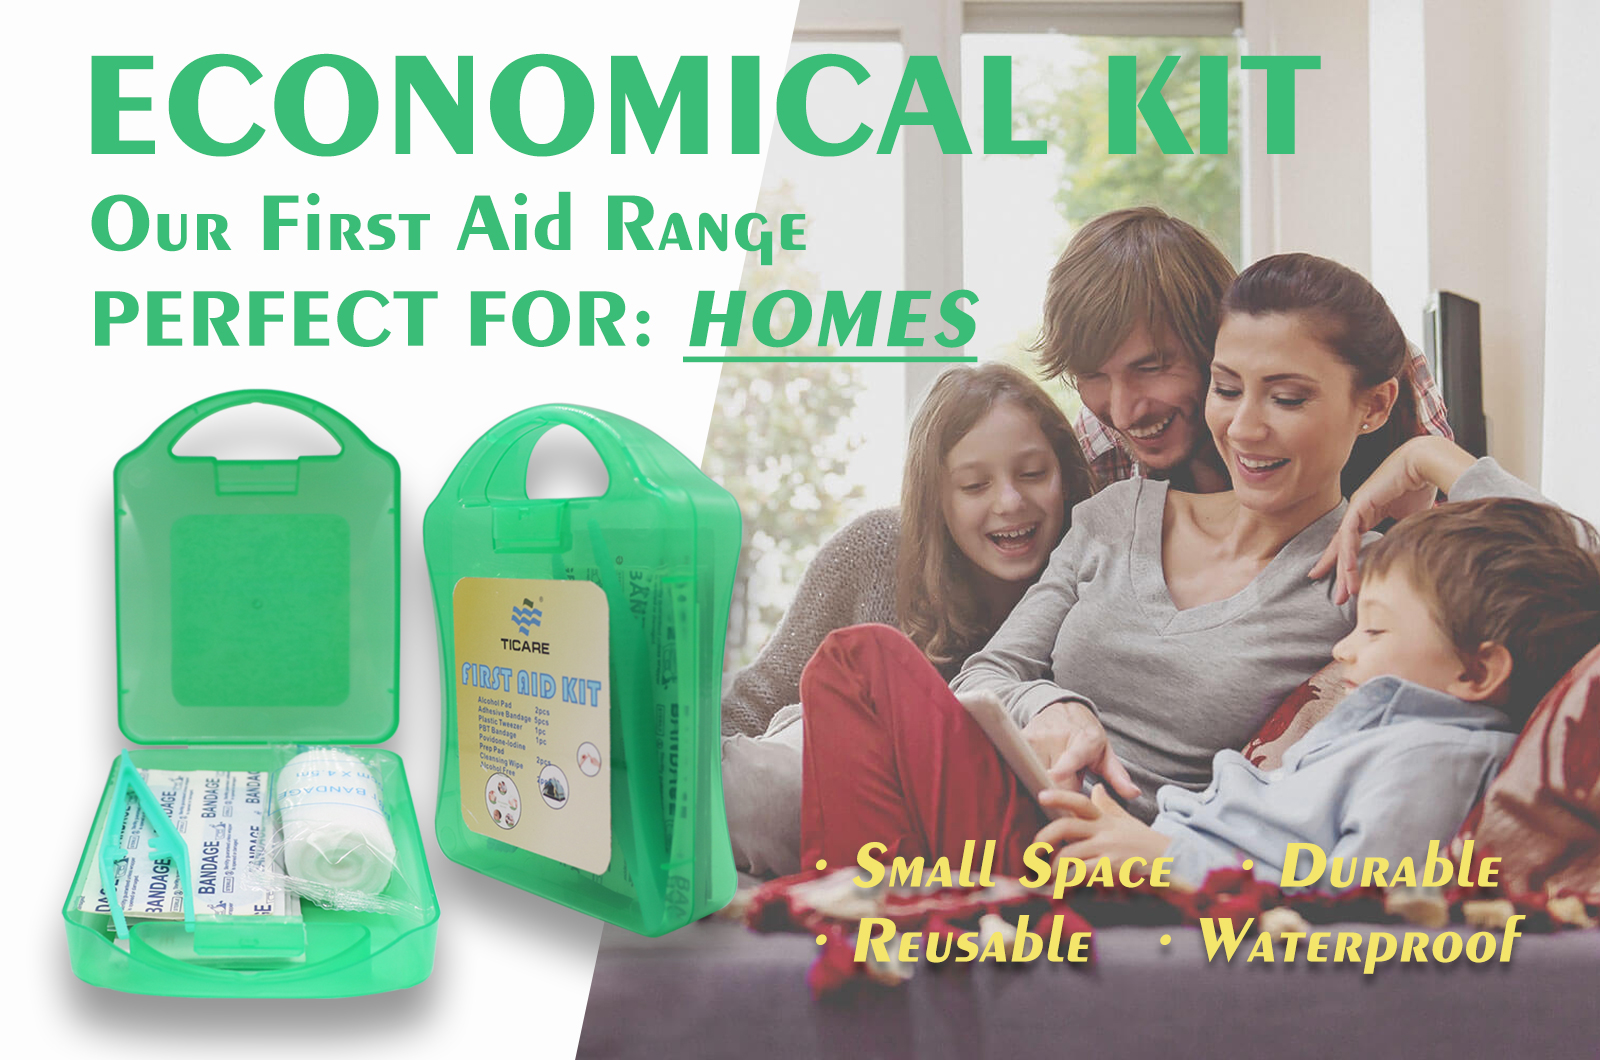 Home First aid kit